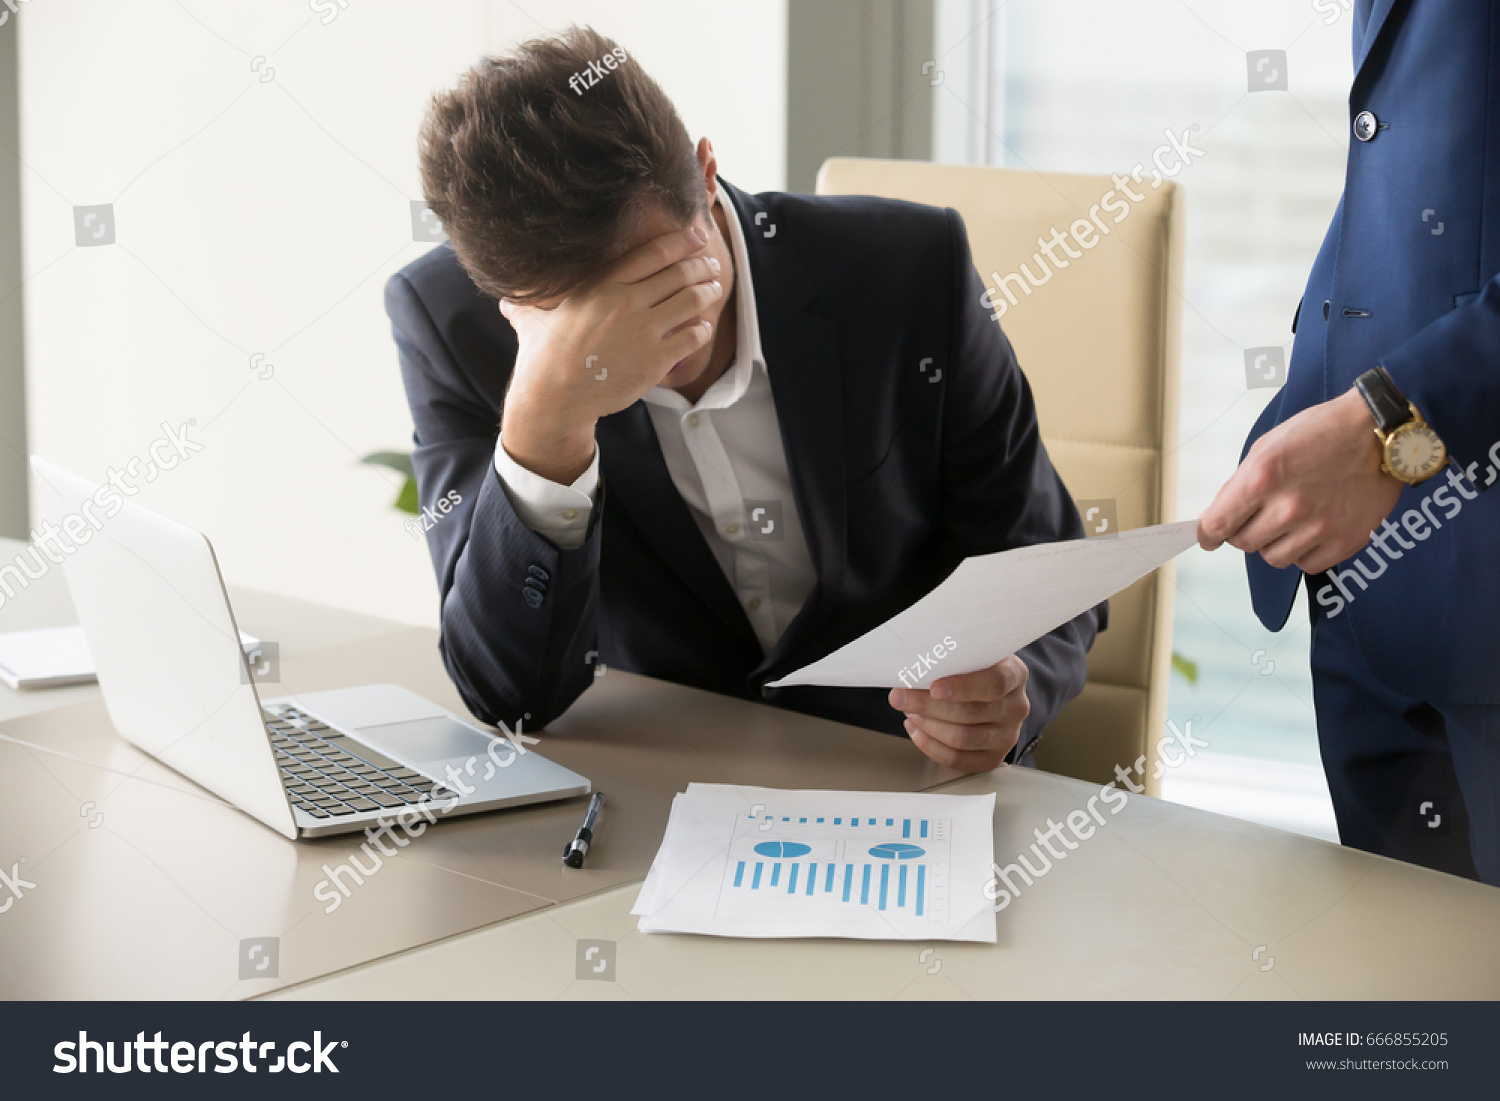 Sad manager getting notice of dismissal, sitting at workplace with laptop and financial documents, employee receiving letter with bad news, entrepreneur upset by commercial failure or firm bankruptcy  #666855205